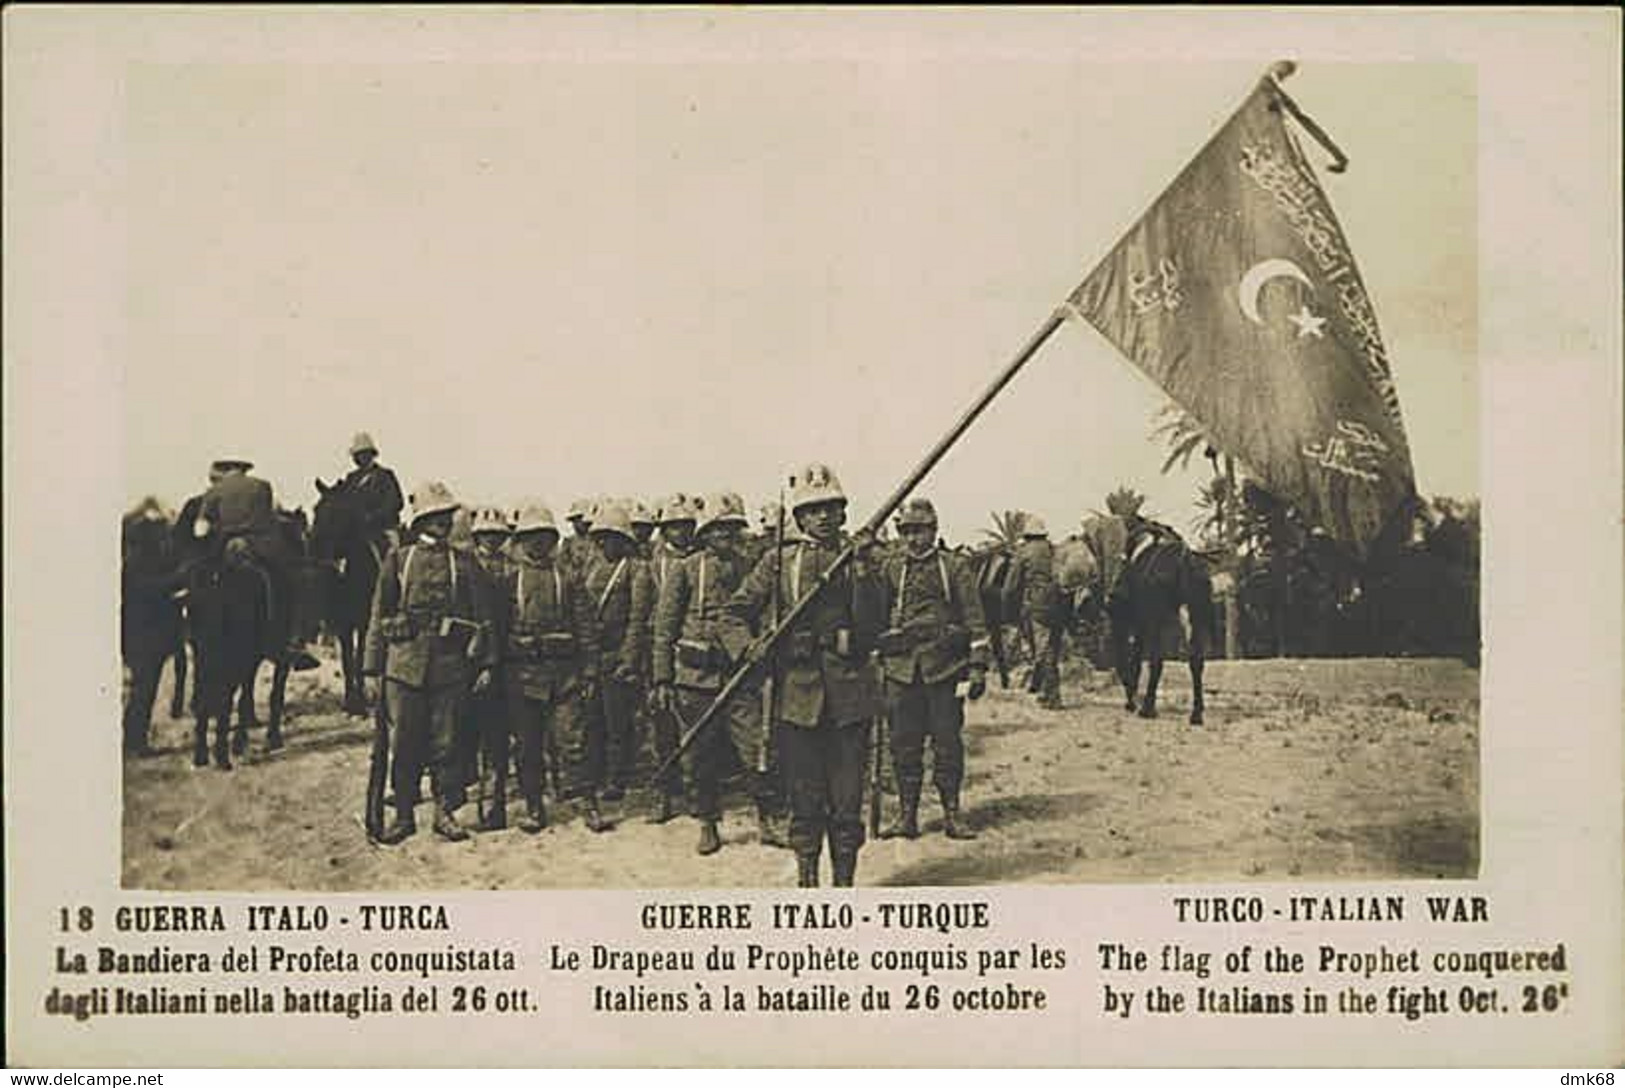 LIBIA / LYBIA - ITALY / TURKEY WAR - THE FLAG OF THE PROPHET CONQUERED BY THE ITALIANS -  RPPC POSTCARD 1910s (11851) - Libia